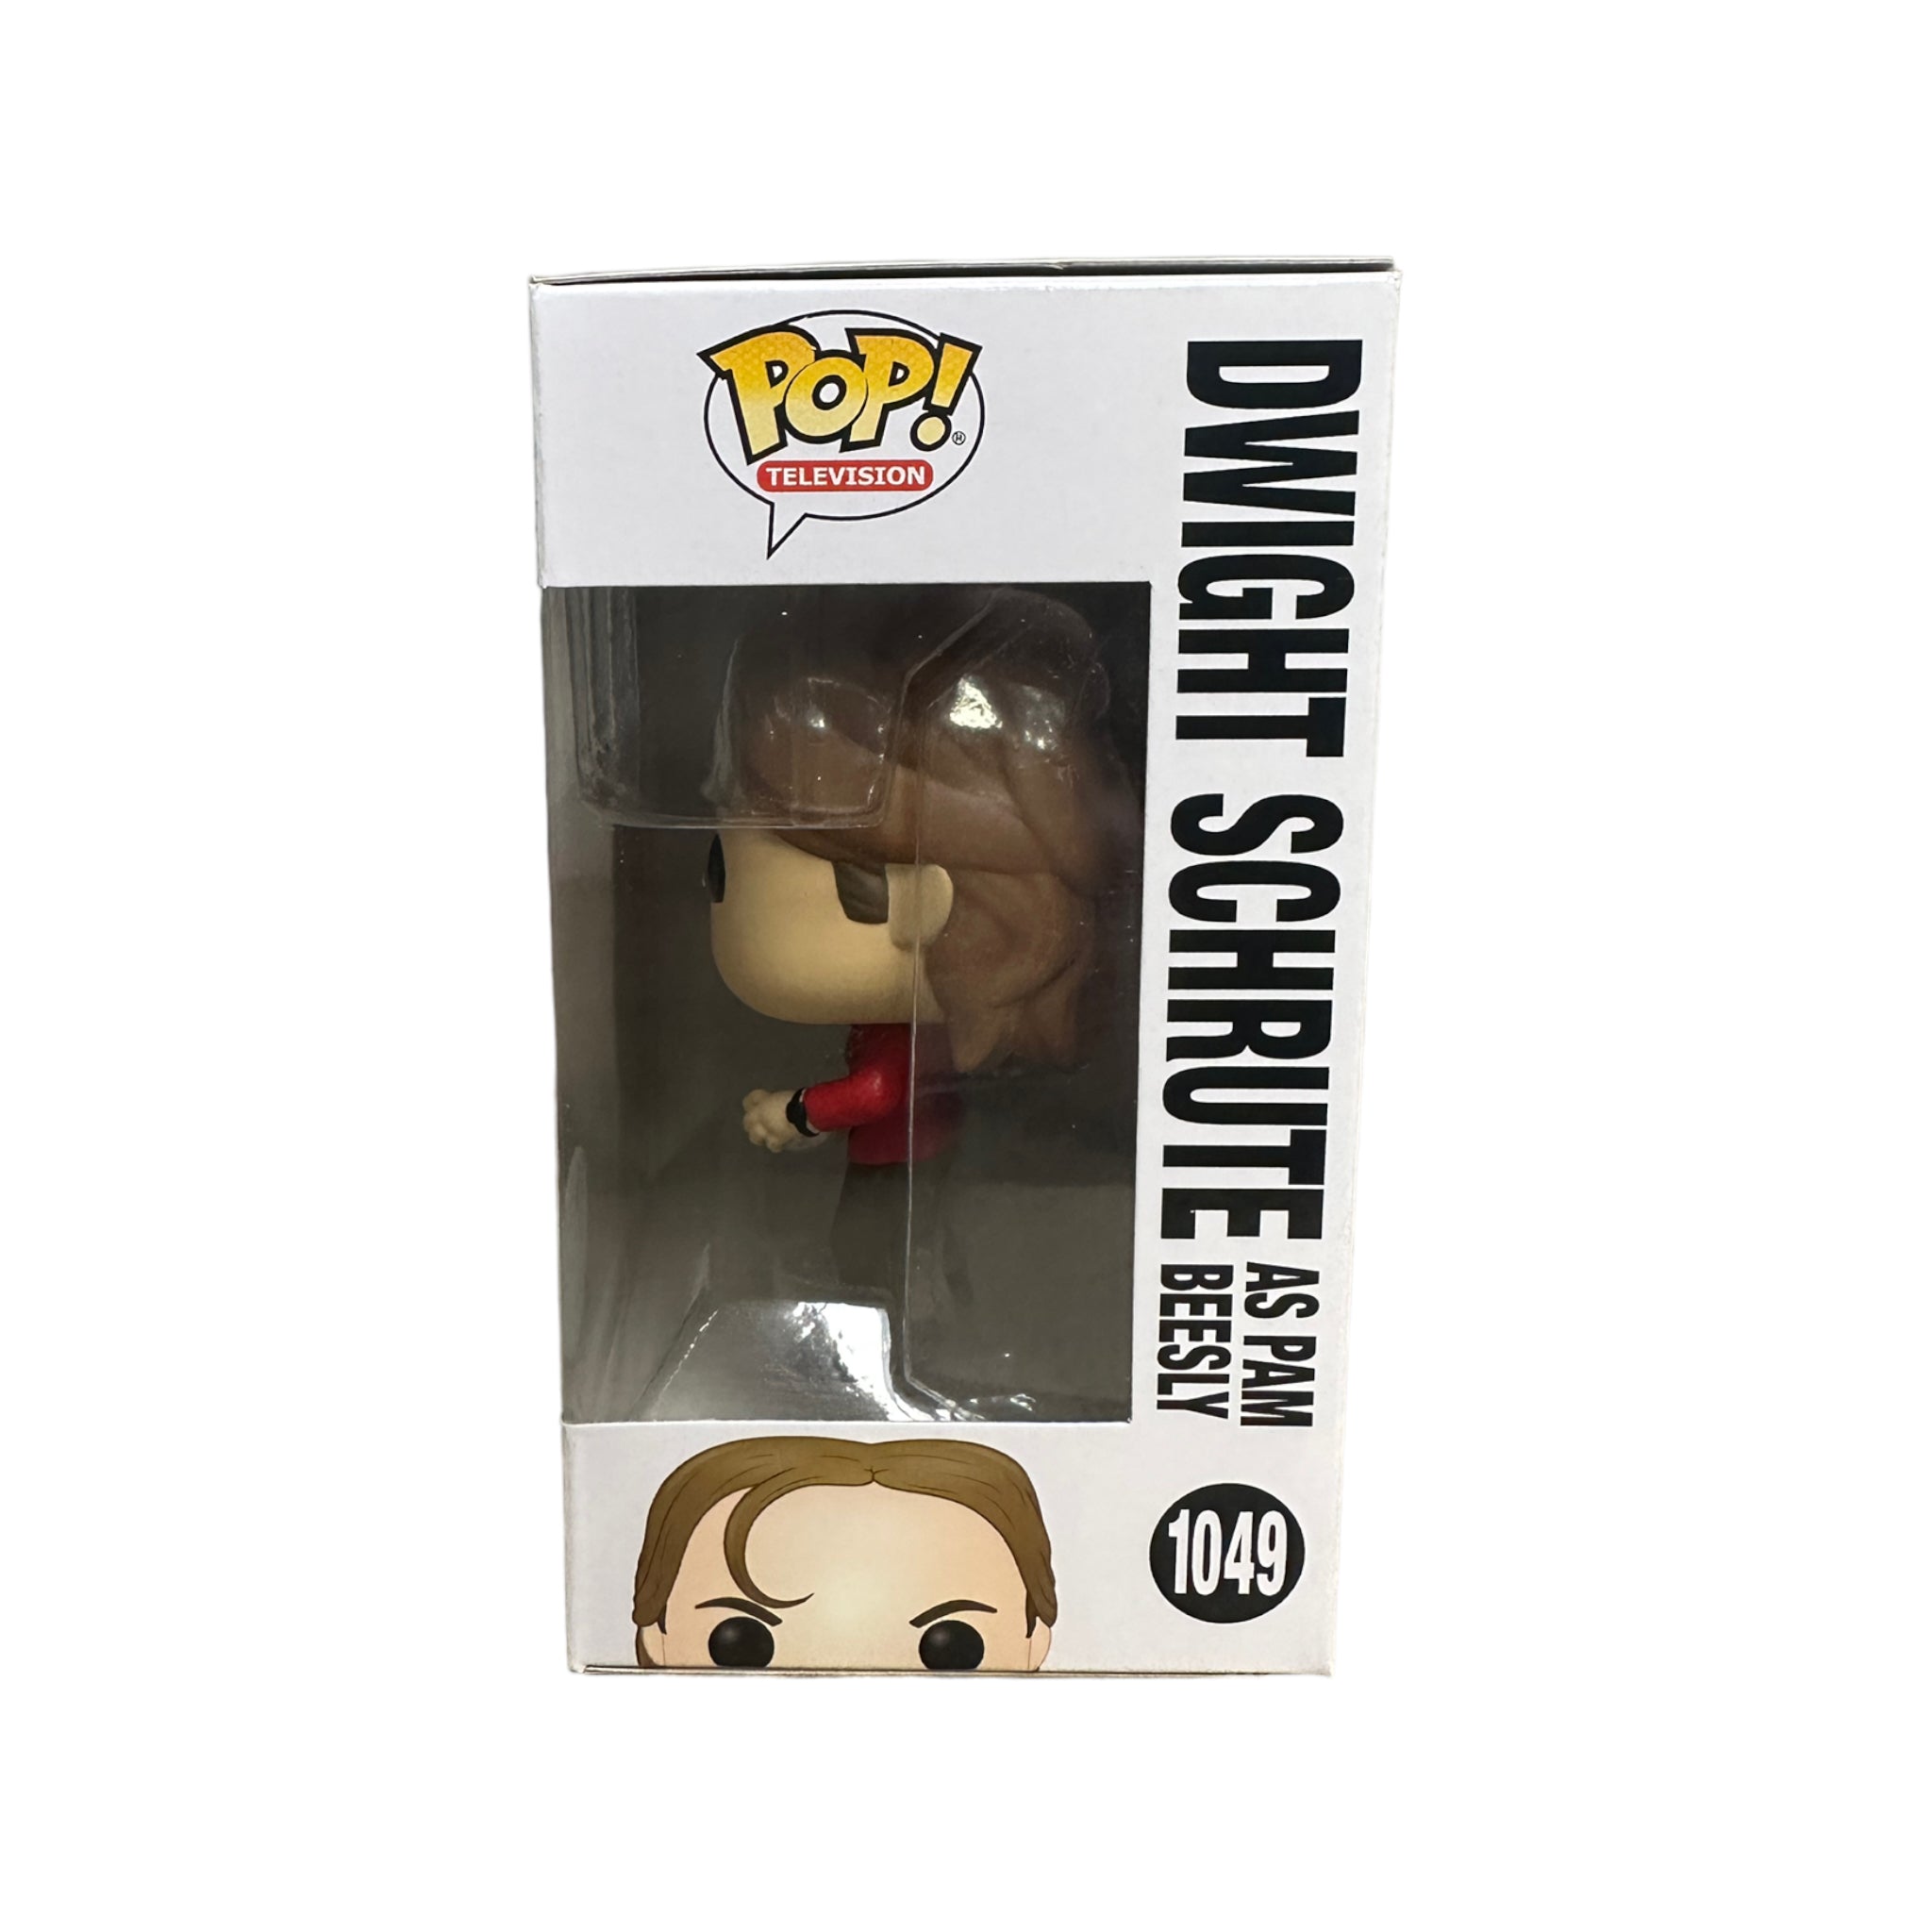 Dwight Schrute as Pam Beesly #1049 Funko Pop! - The Office - Funko Shop Exclusive - Condition 8.75/10